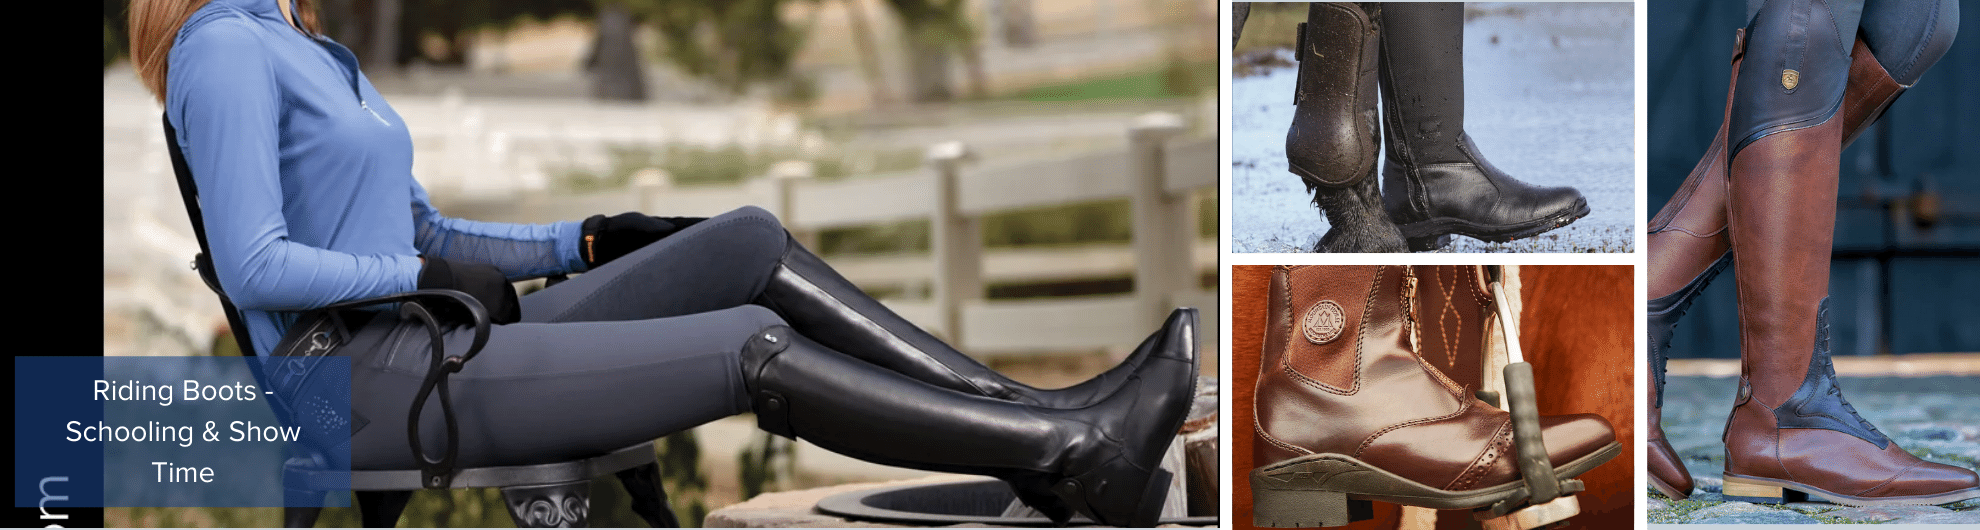 Riding Boots for Schooling & Show